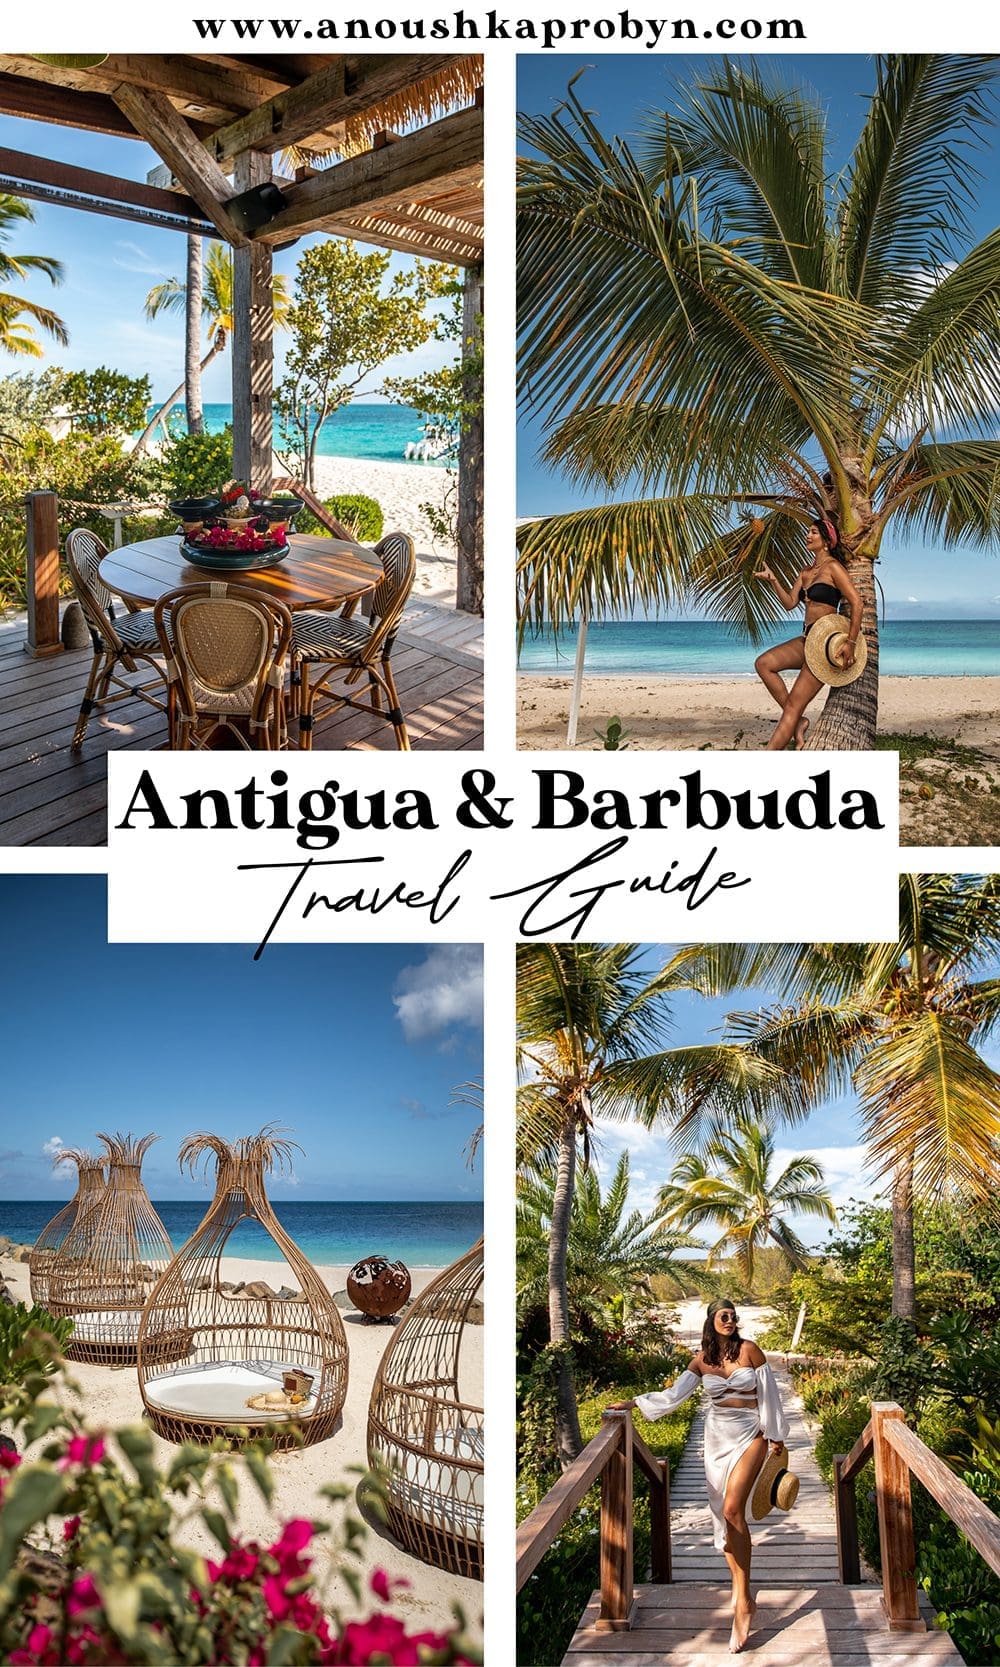 Antigua and Barbuda Travel Guide Things to Do, Restaurants, Tips and Advice